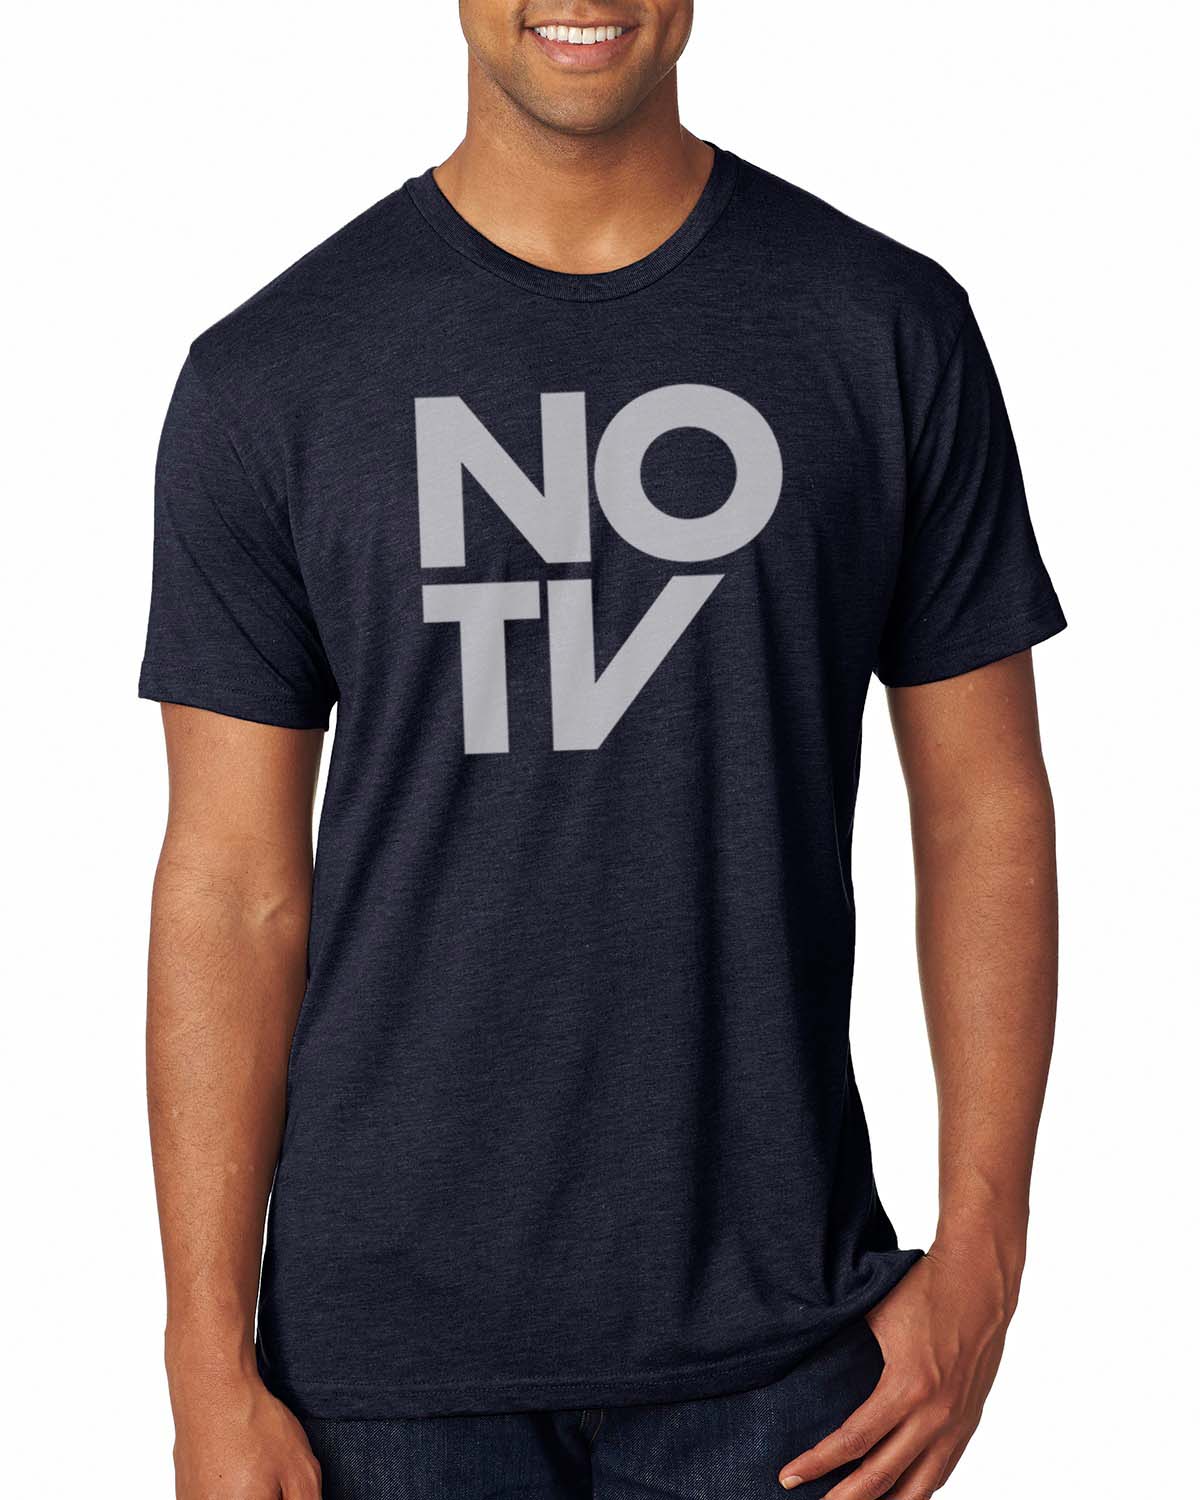 Nothing On TV (NOTV) Band Tee